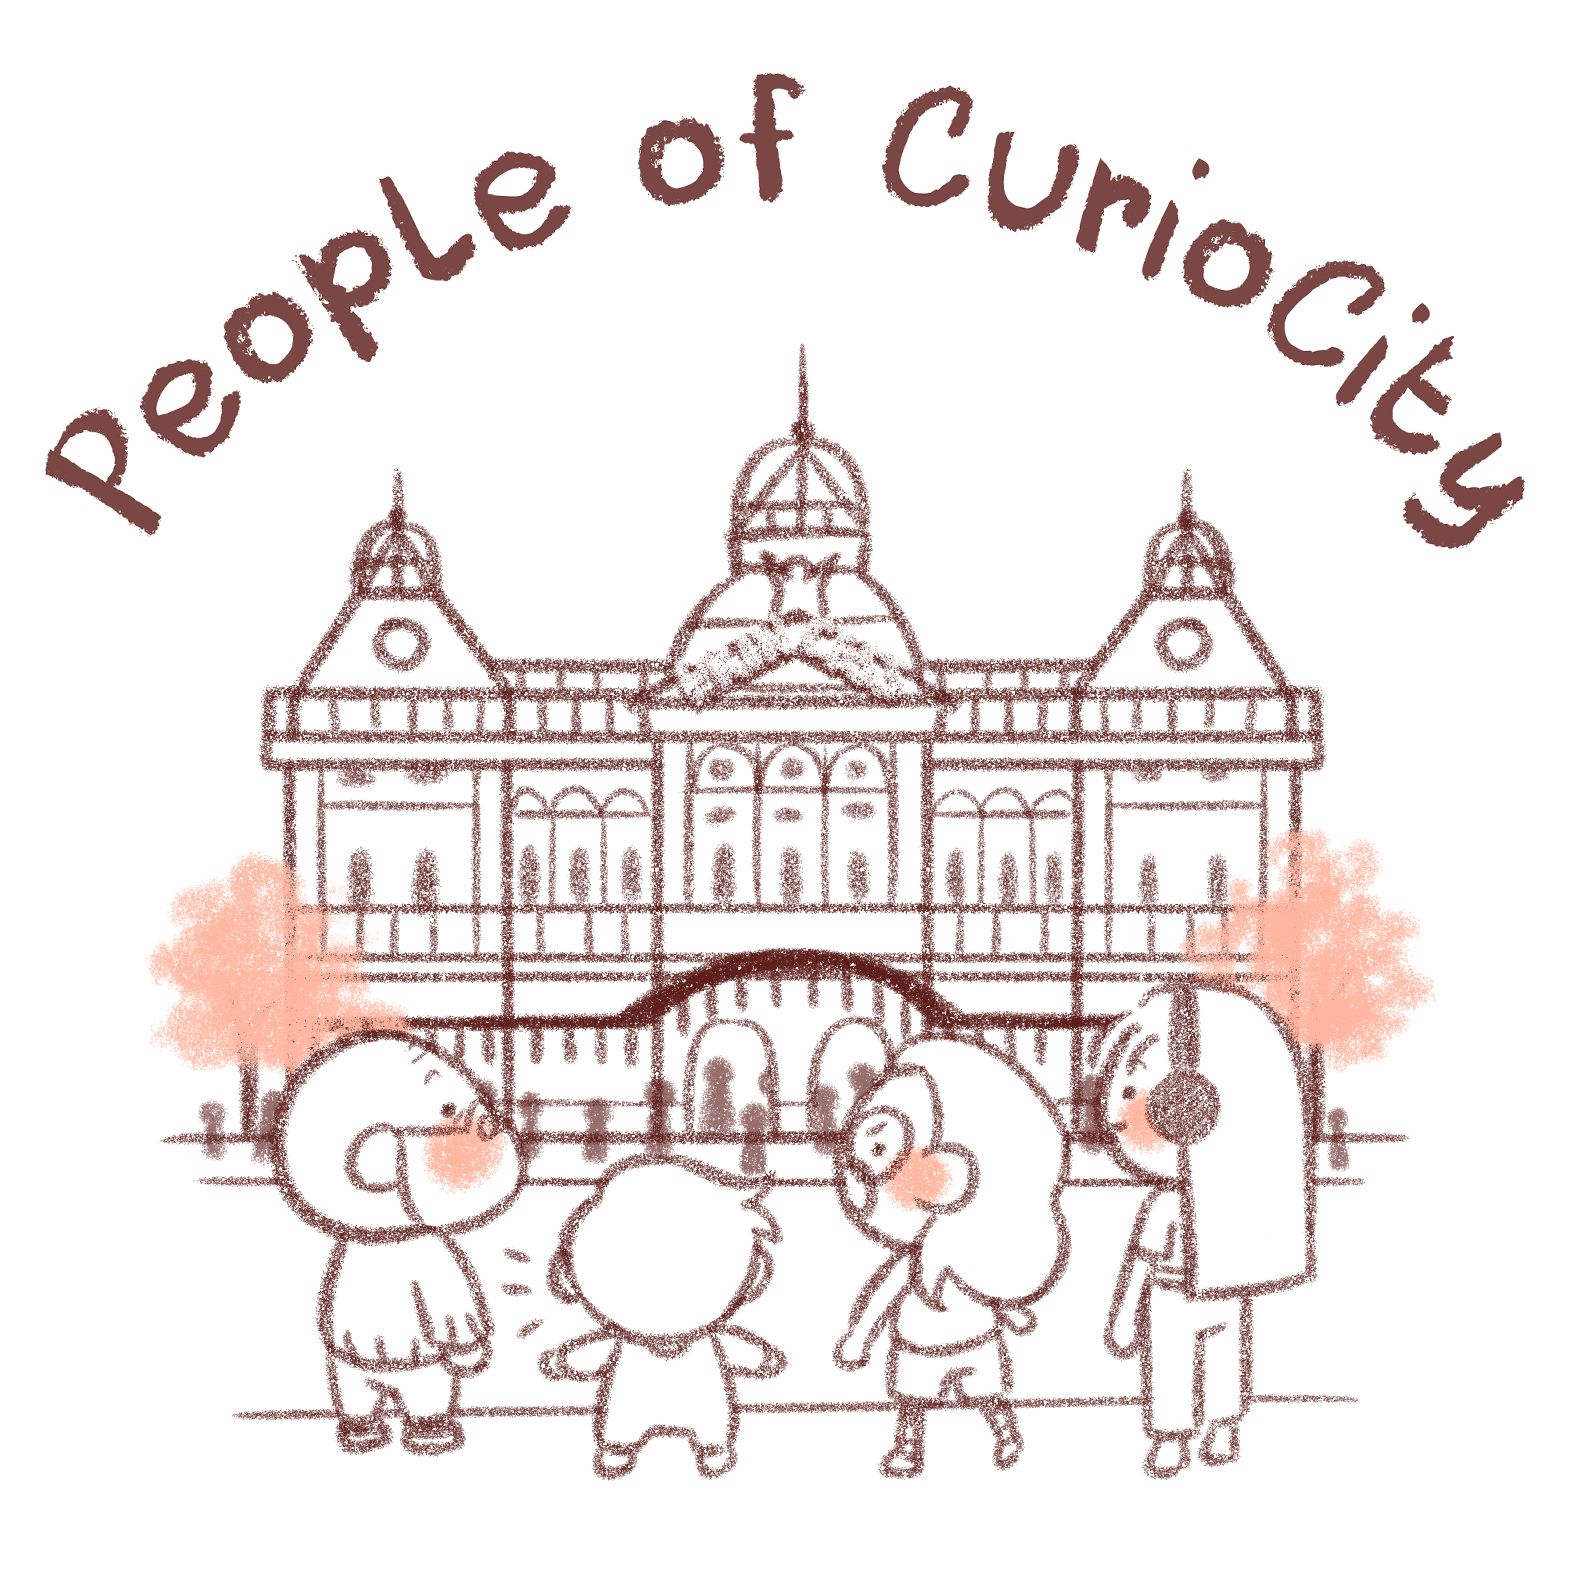 Illustration of the characters from the game People of CurioCity approaching the princess theatre.